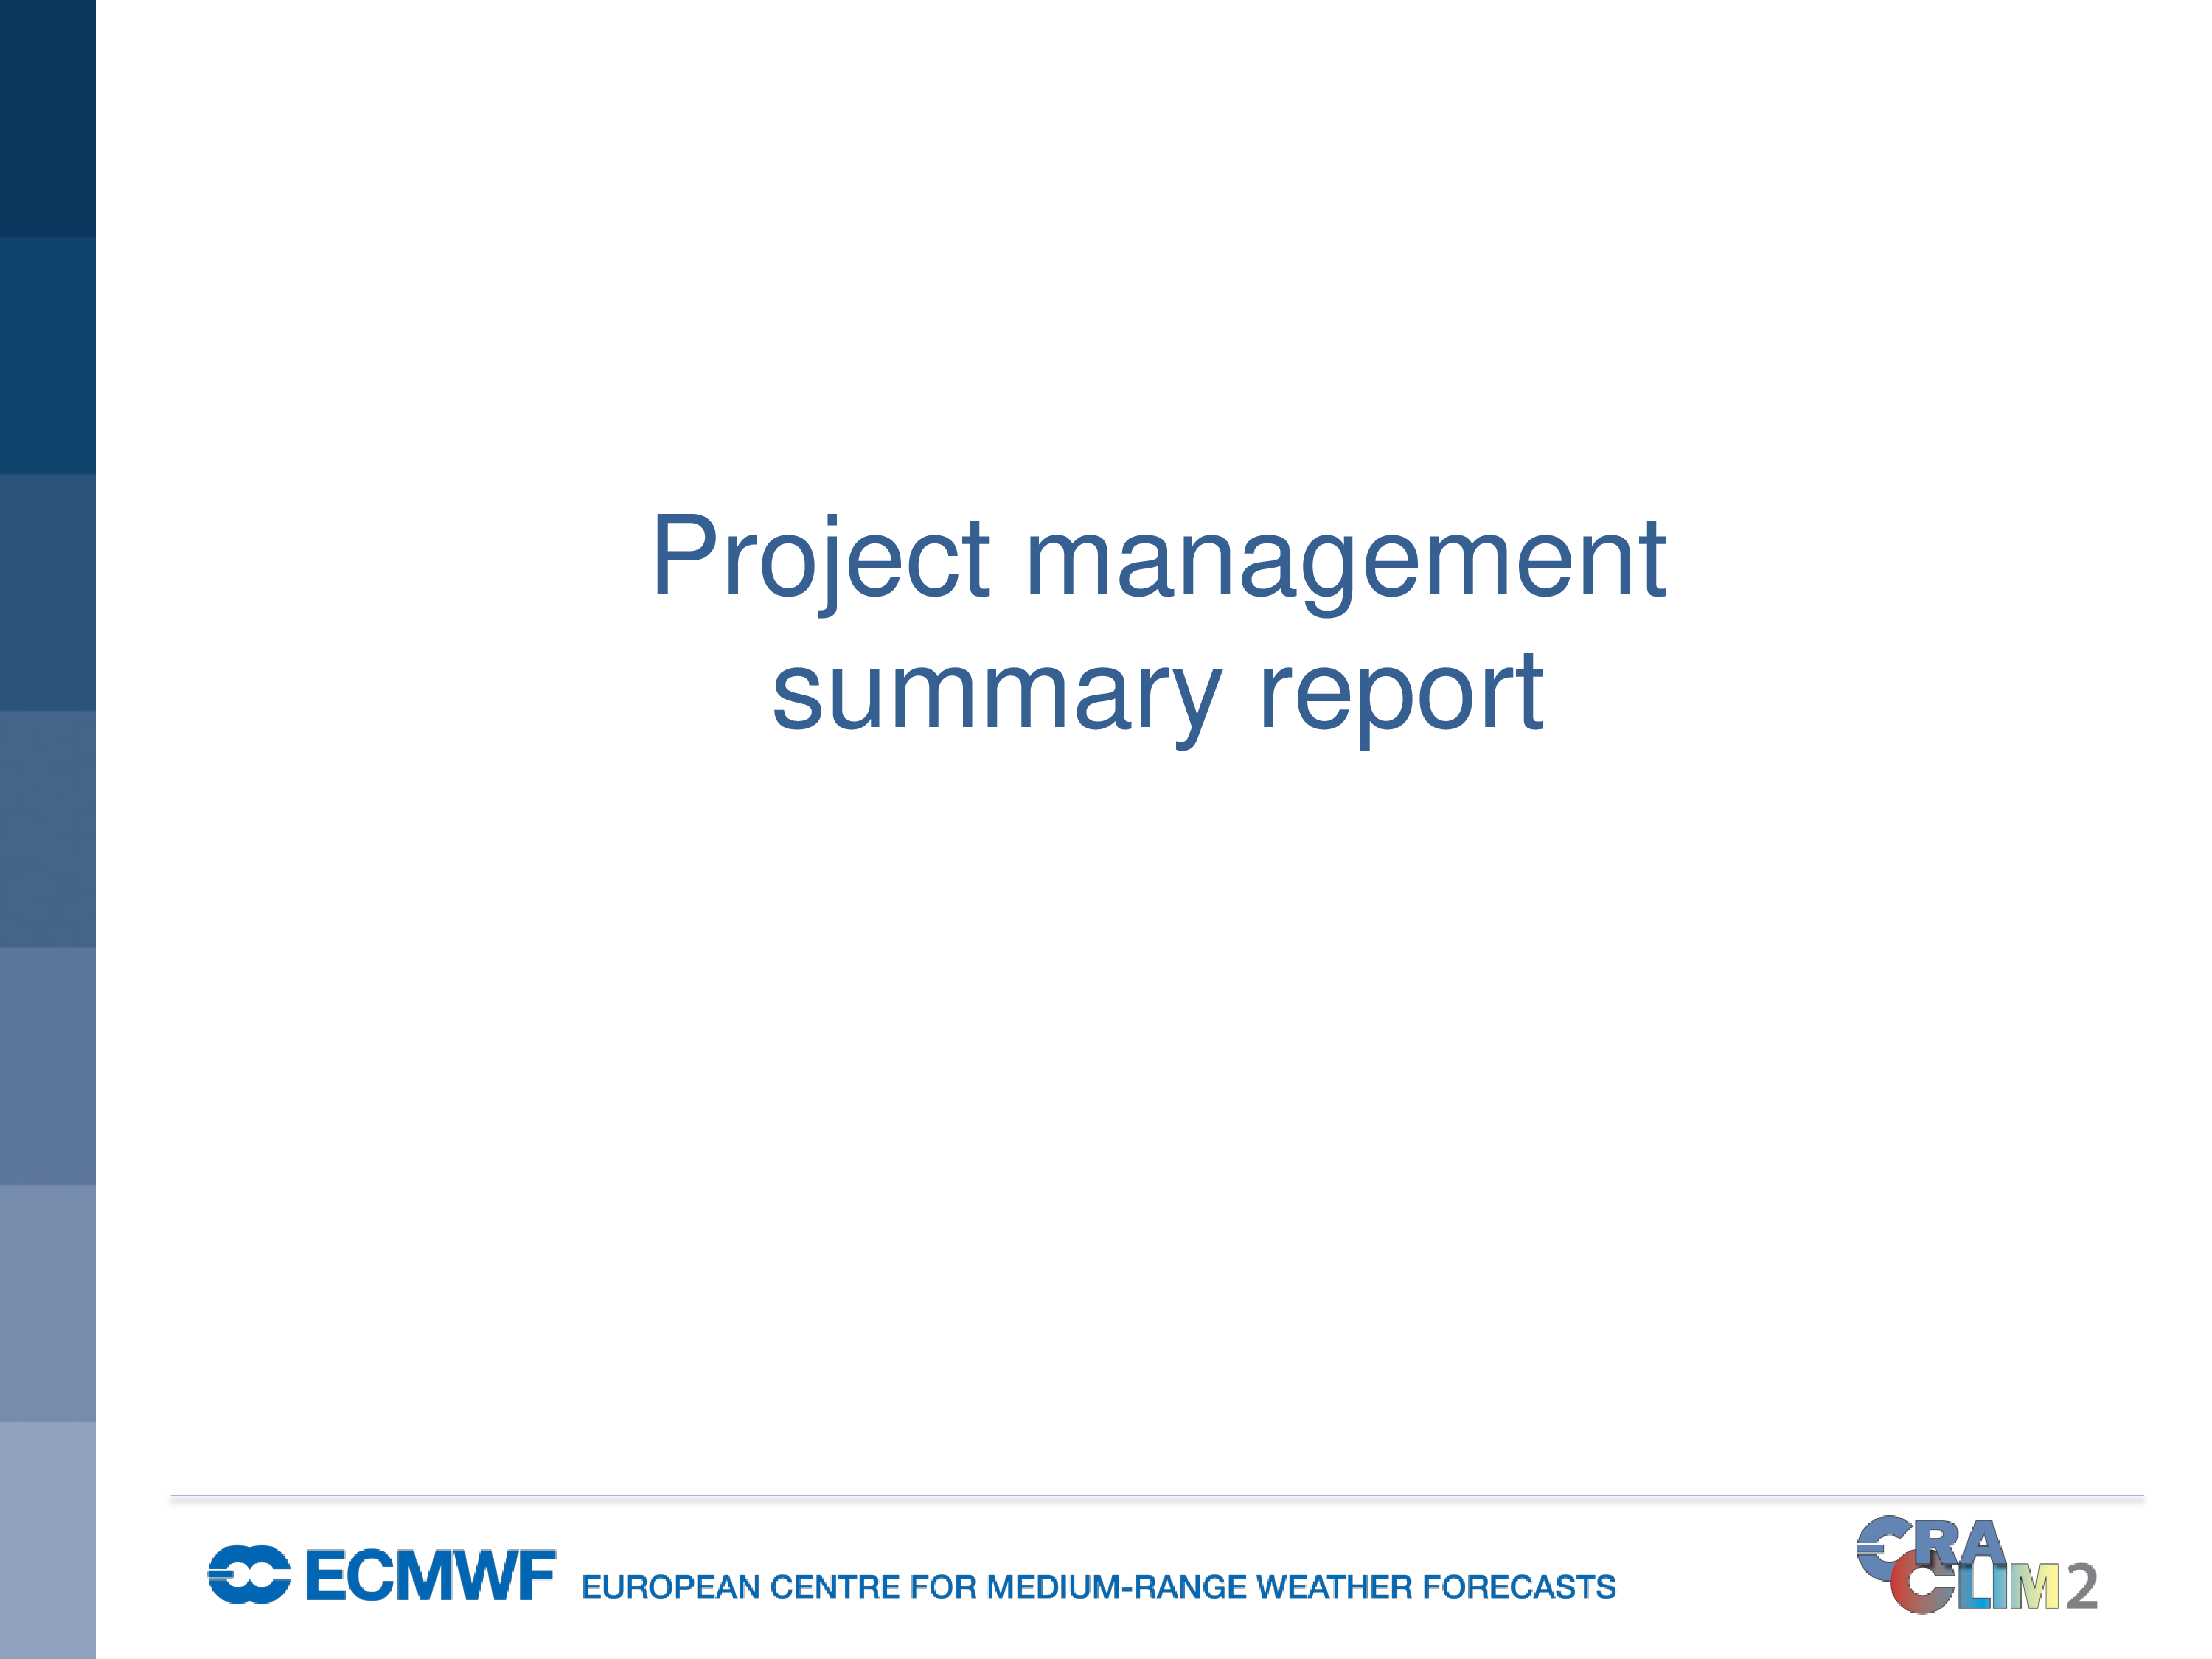 Project Management Summary Report main image